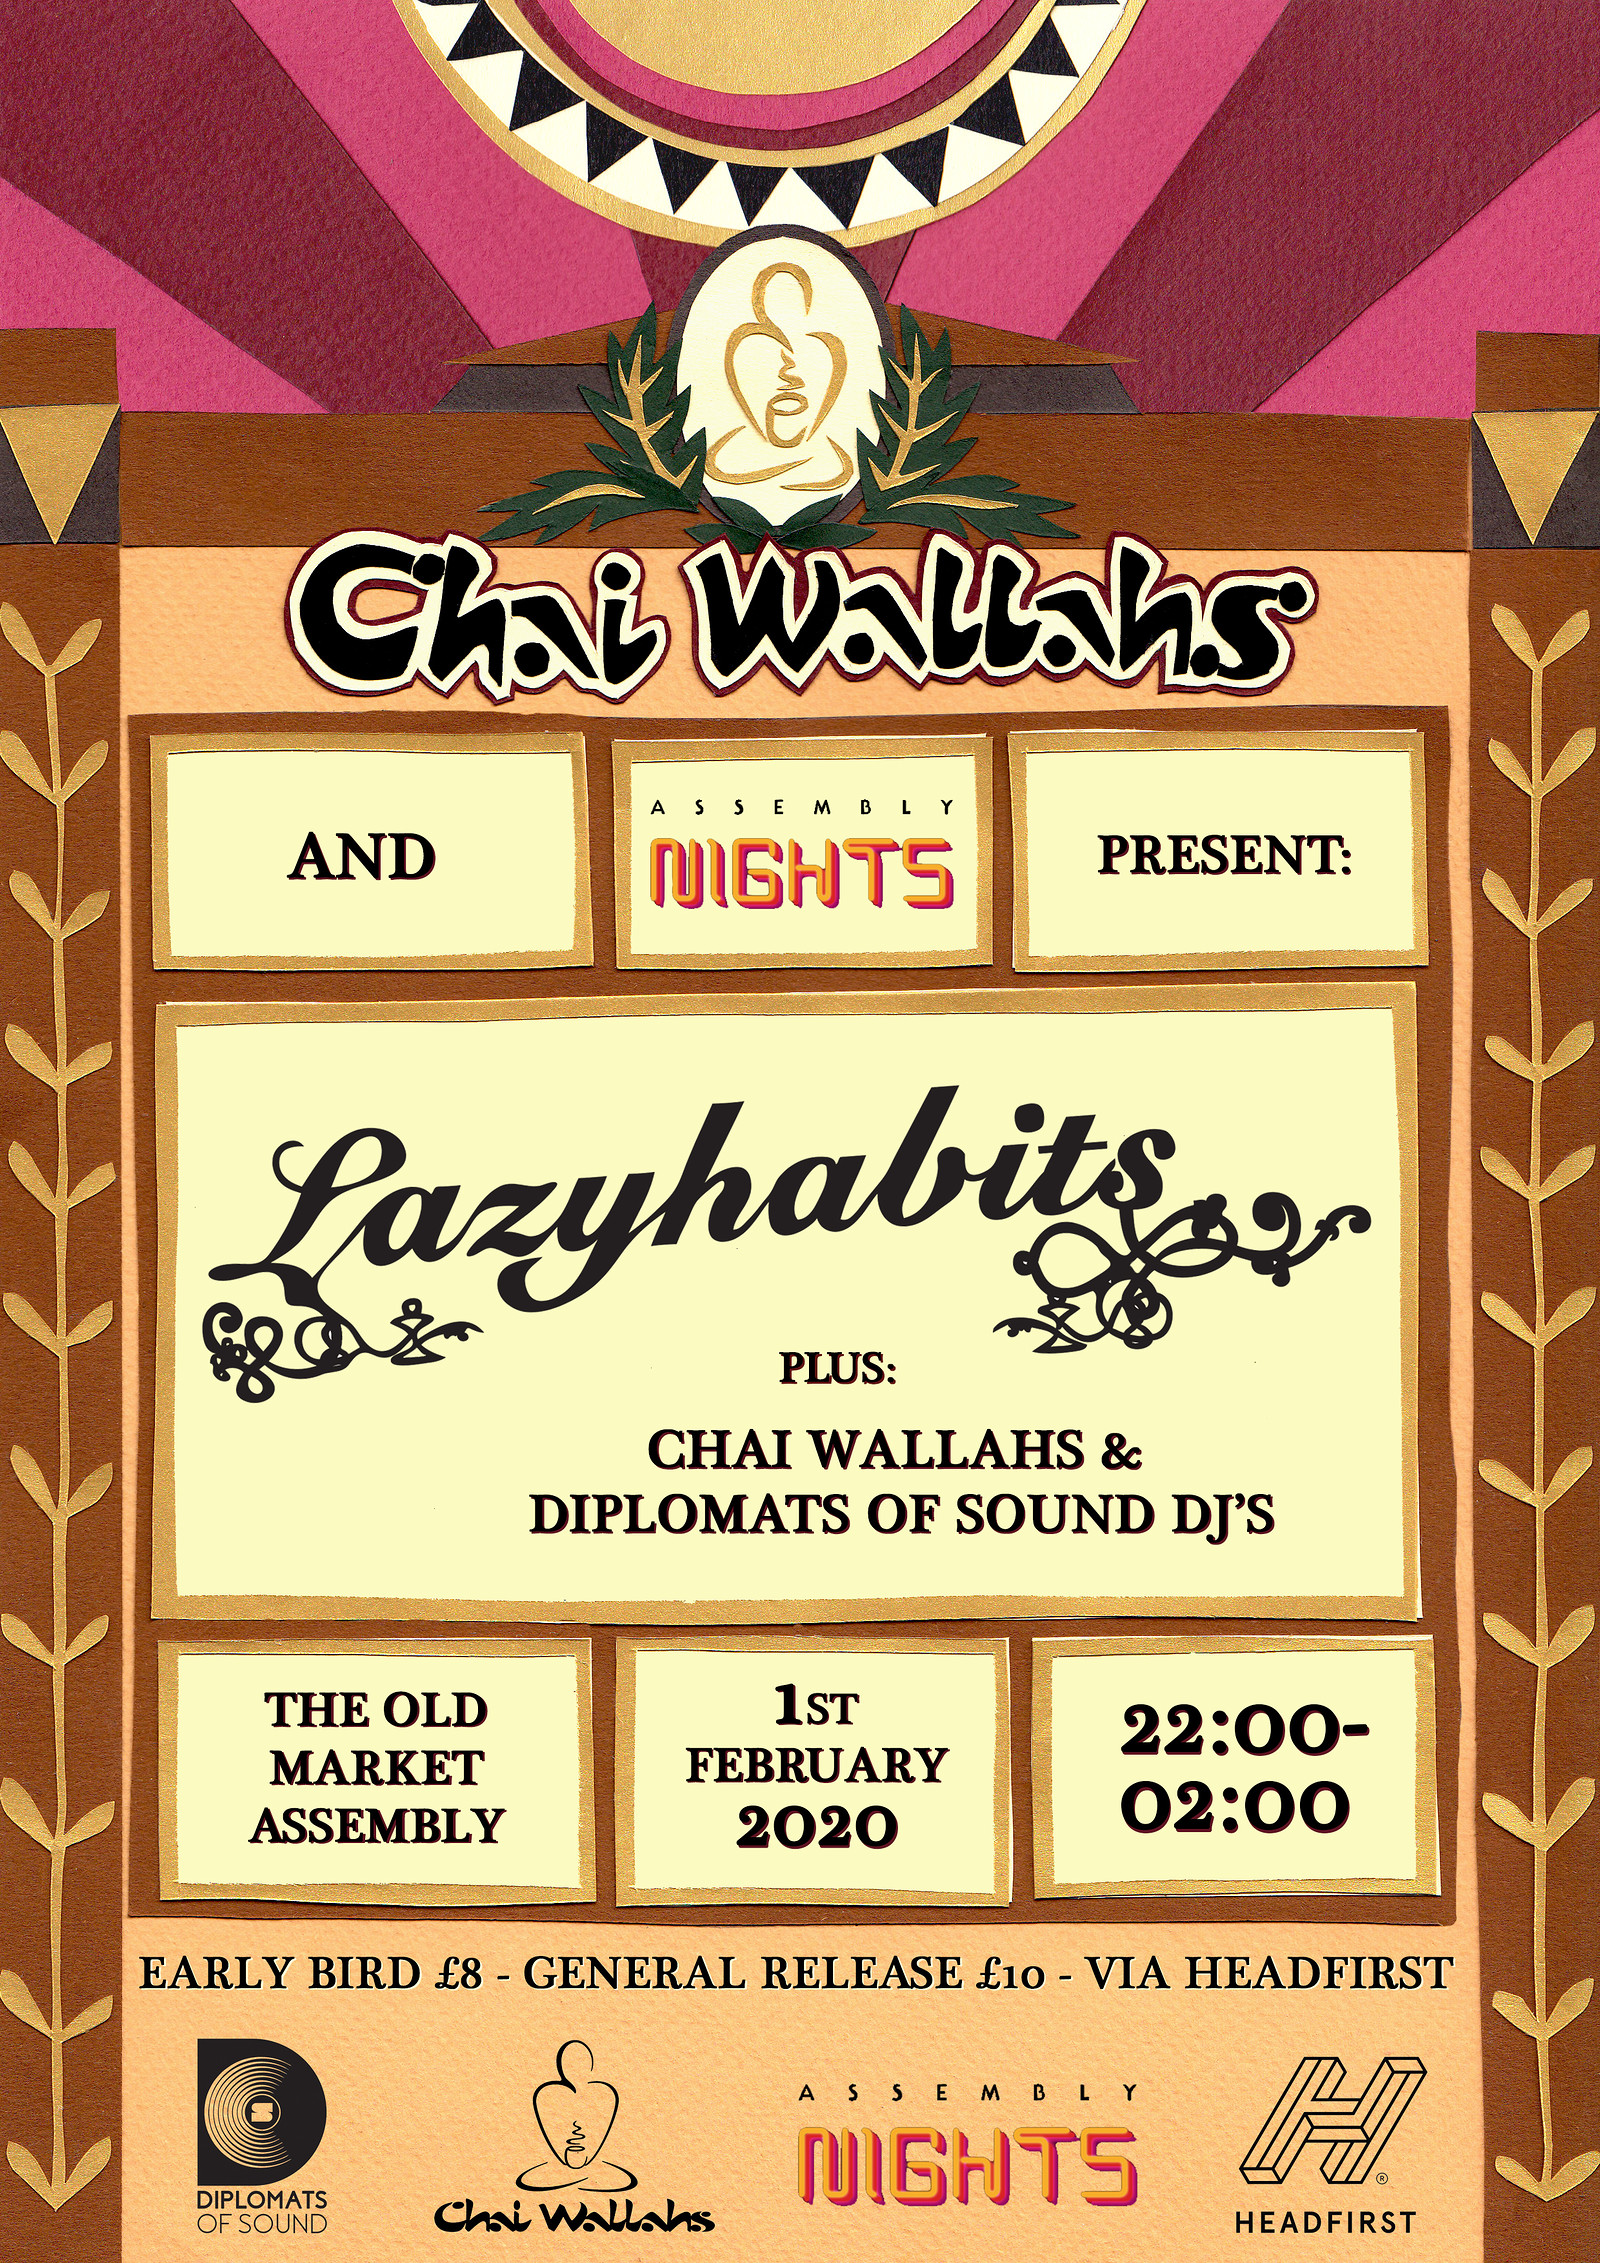 Chai Wallahs & Assembly Nights Present:Lazy Habits at The Old Market Assembly